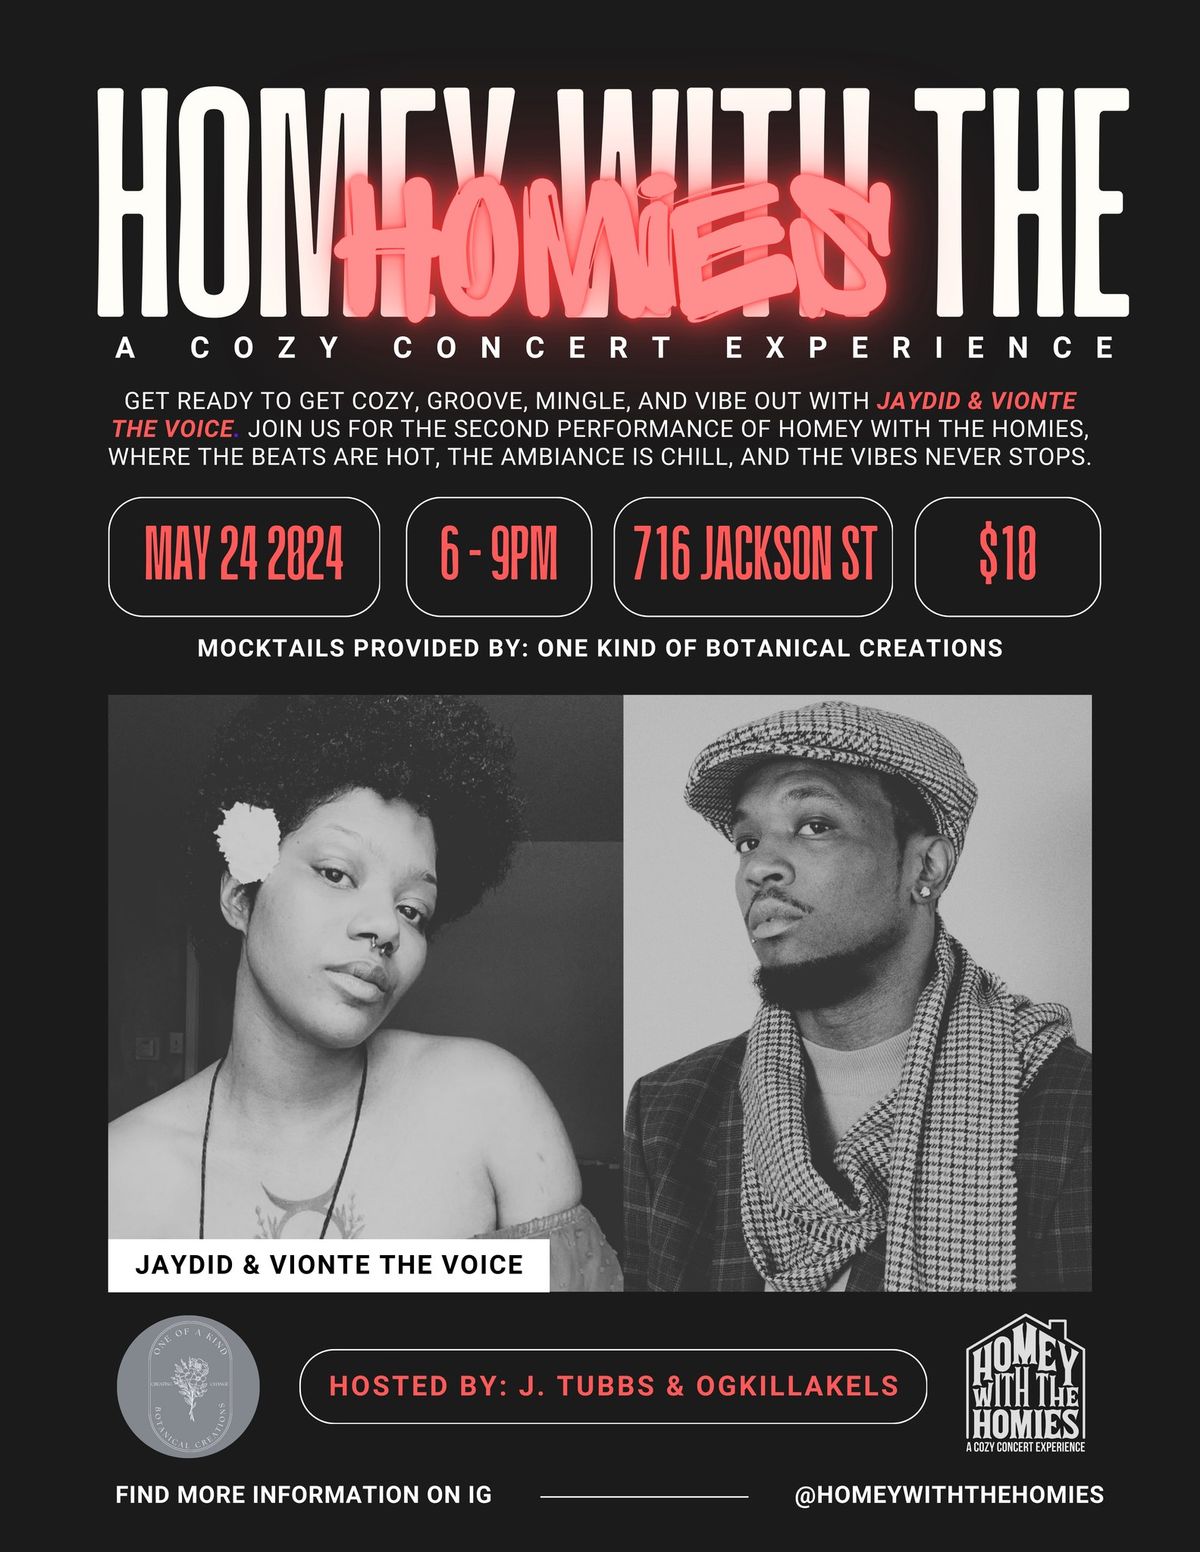 HOMEY W\/ THE HOMIES PRESENTS: JAYDID & VIONTE THE VOICE